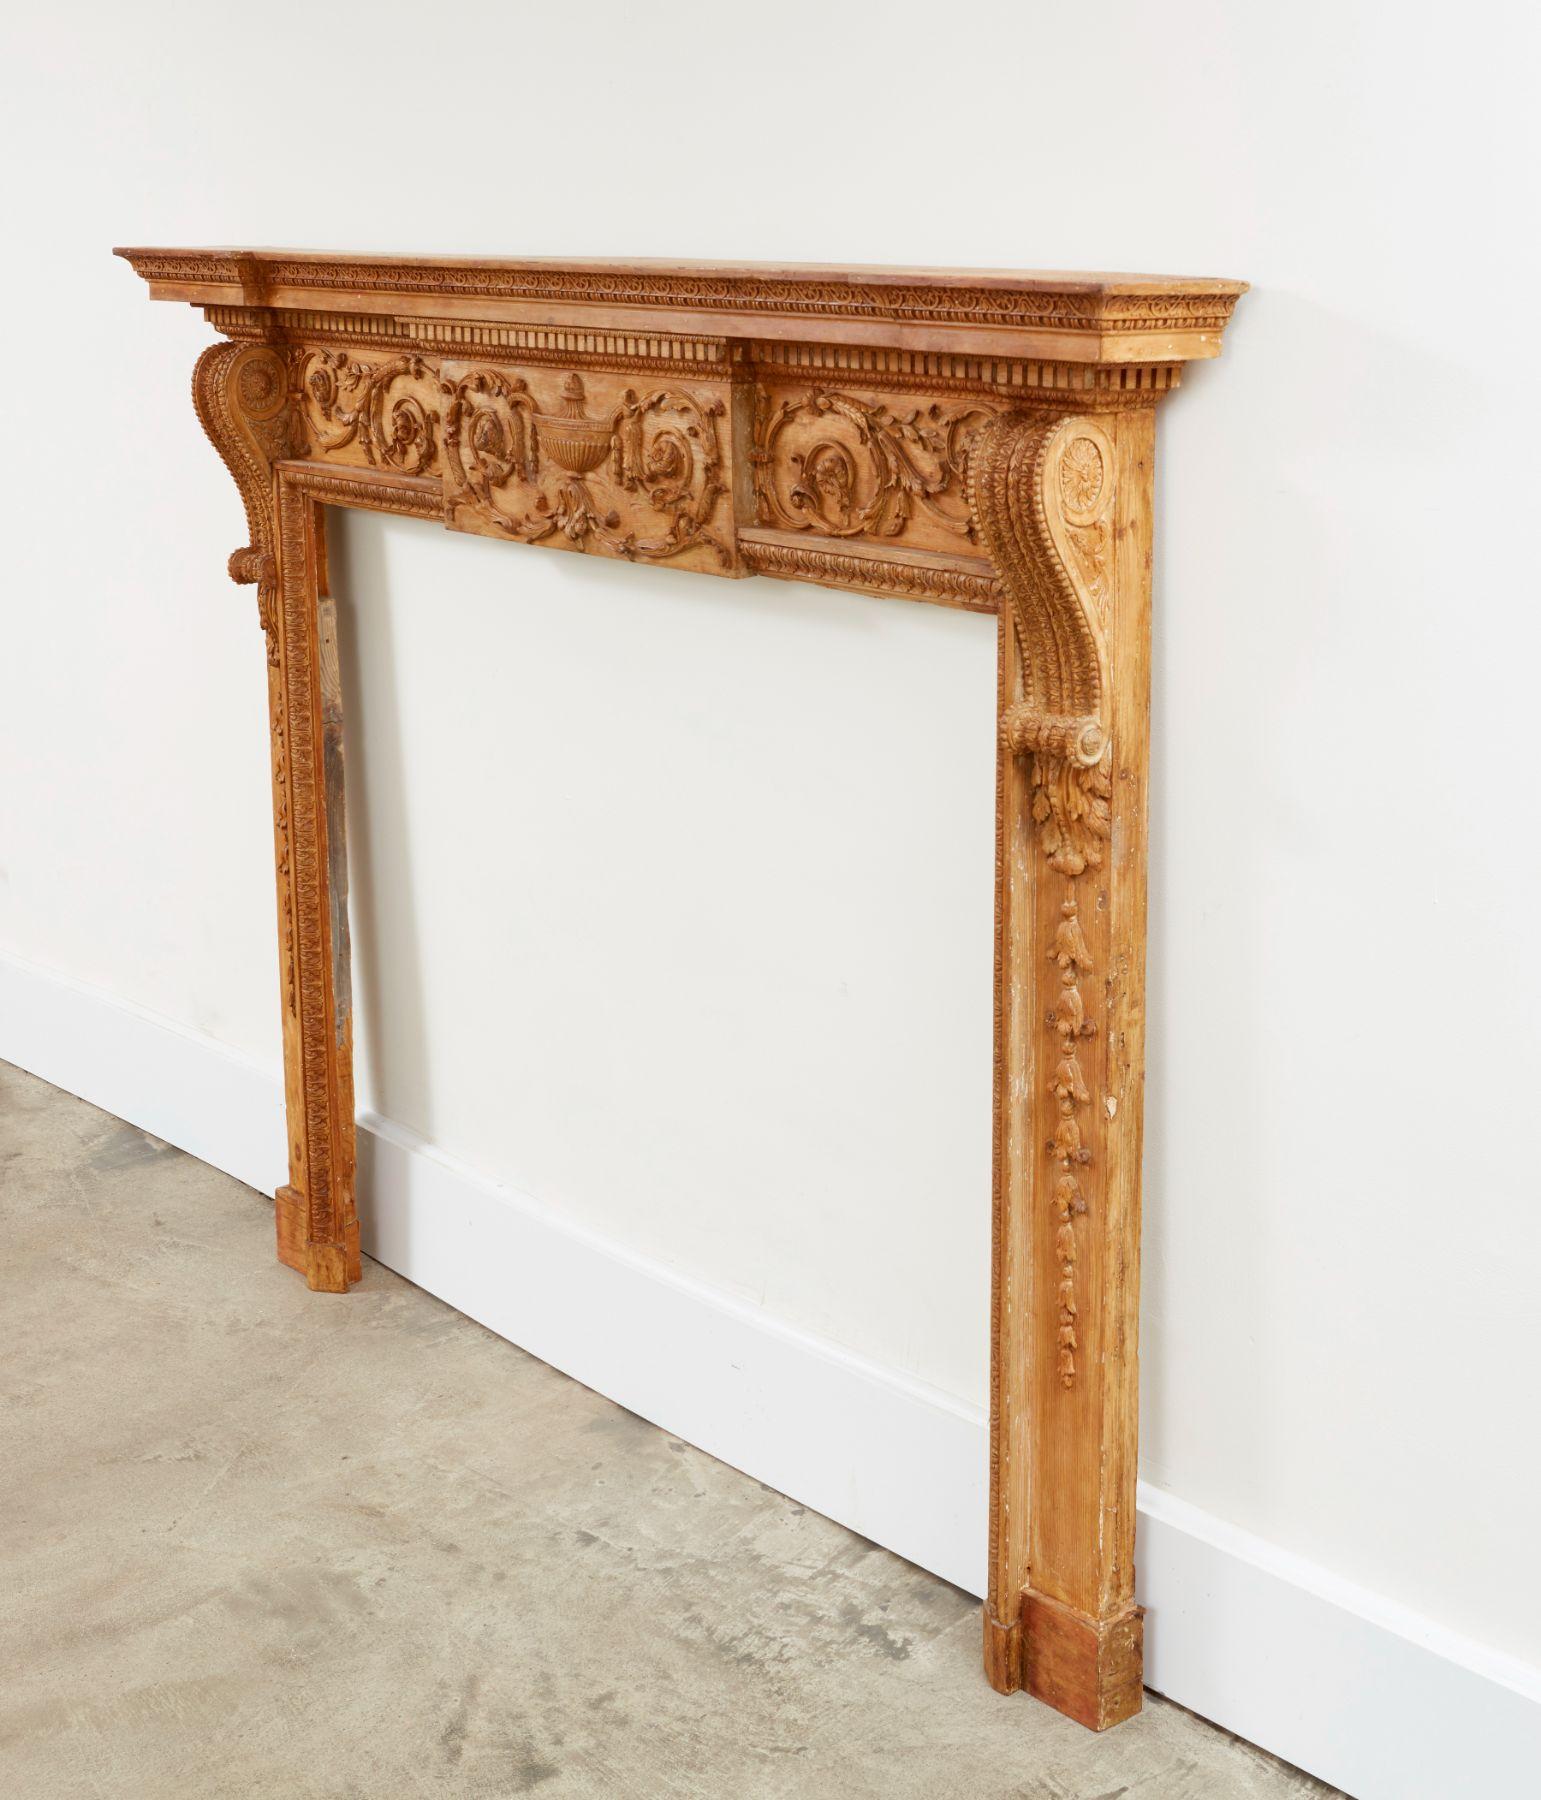 Very fine George III period carved pine mantel, the pediment with stepped ends having band of ringed rosettes over dentil molded frieze over two scrolls with acanthus and water leaf carving, the central tablet with urn and trailing honeysuckle